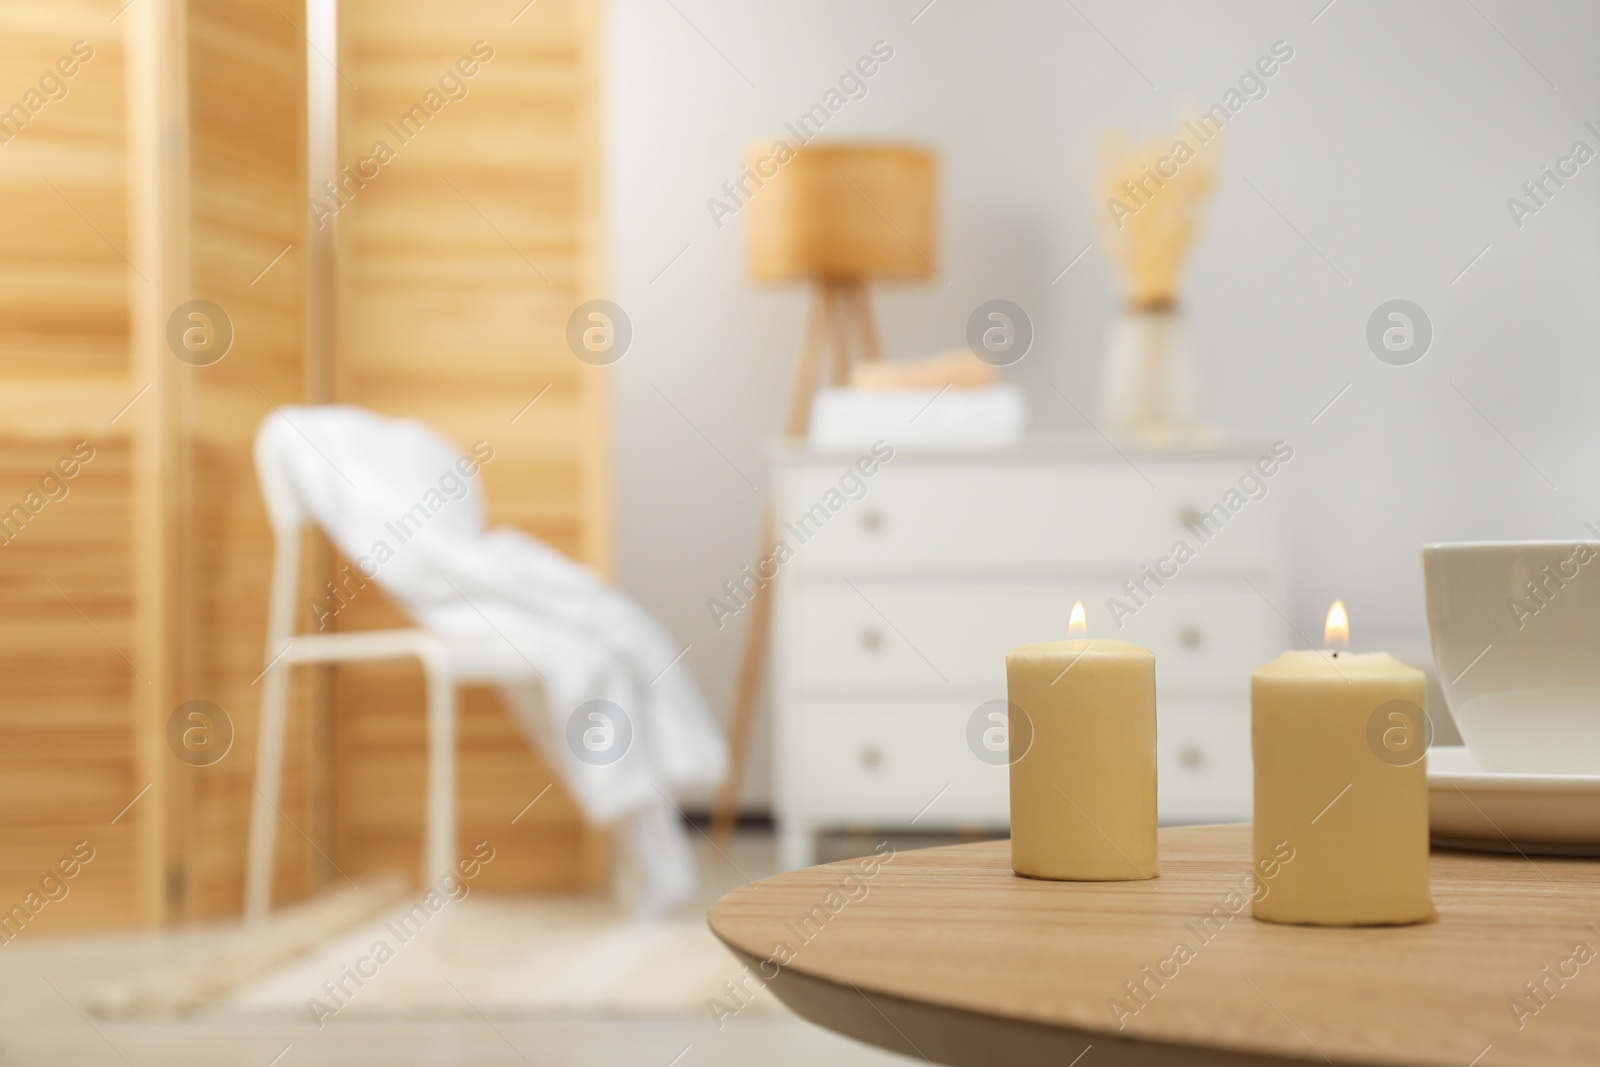 Photo of Wooden table with candles and cup, space for text. Interior design